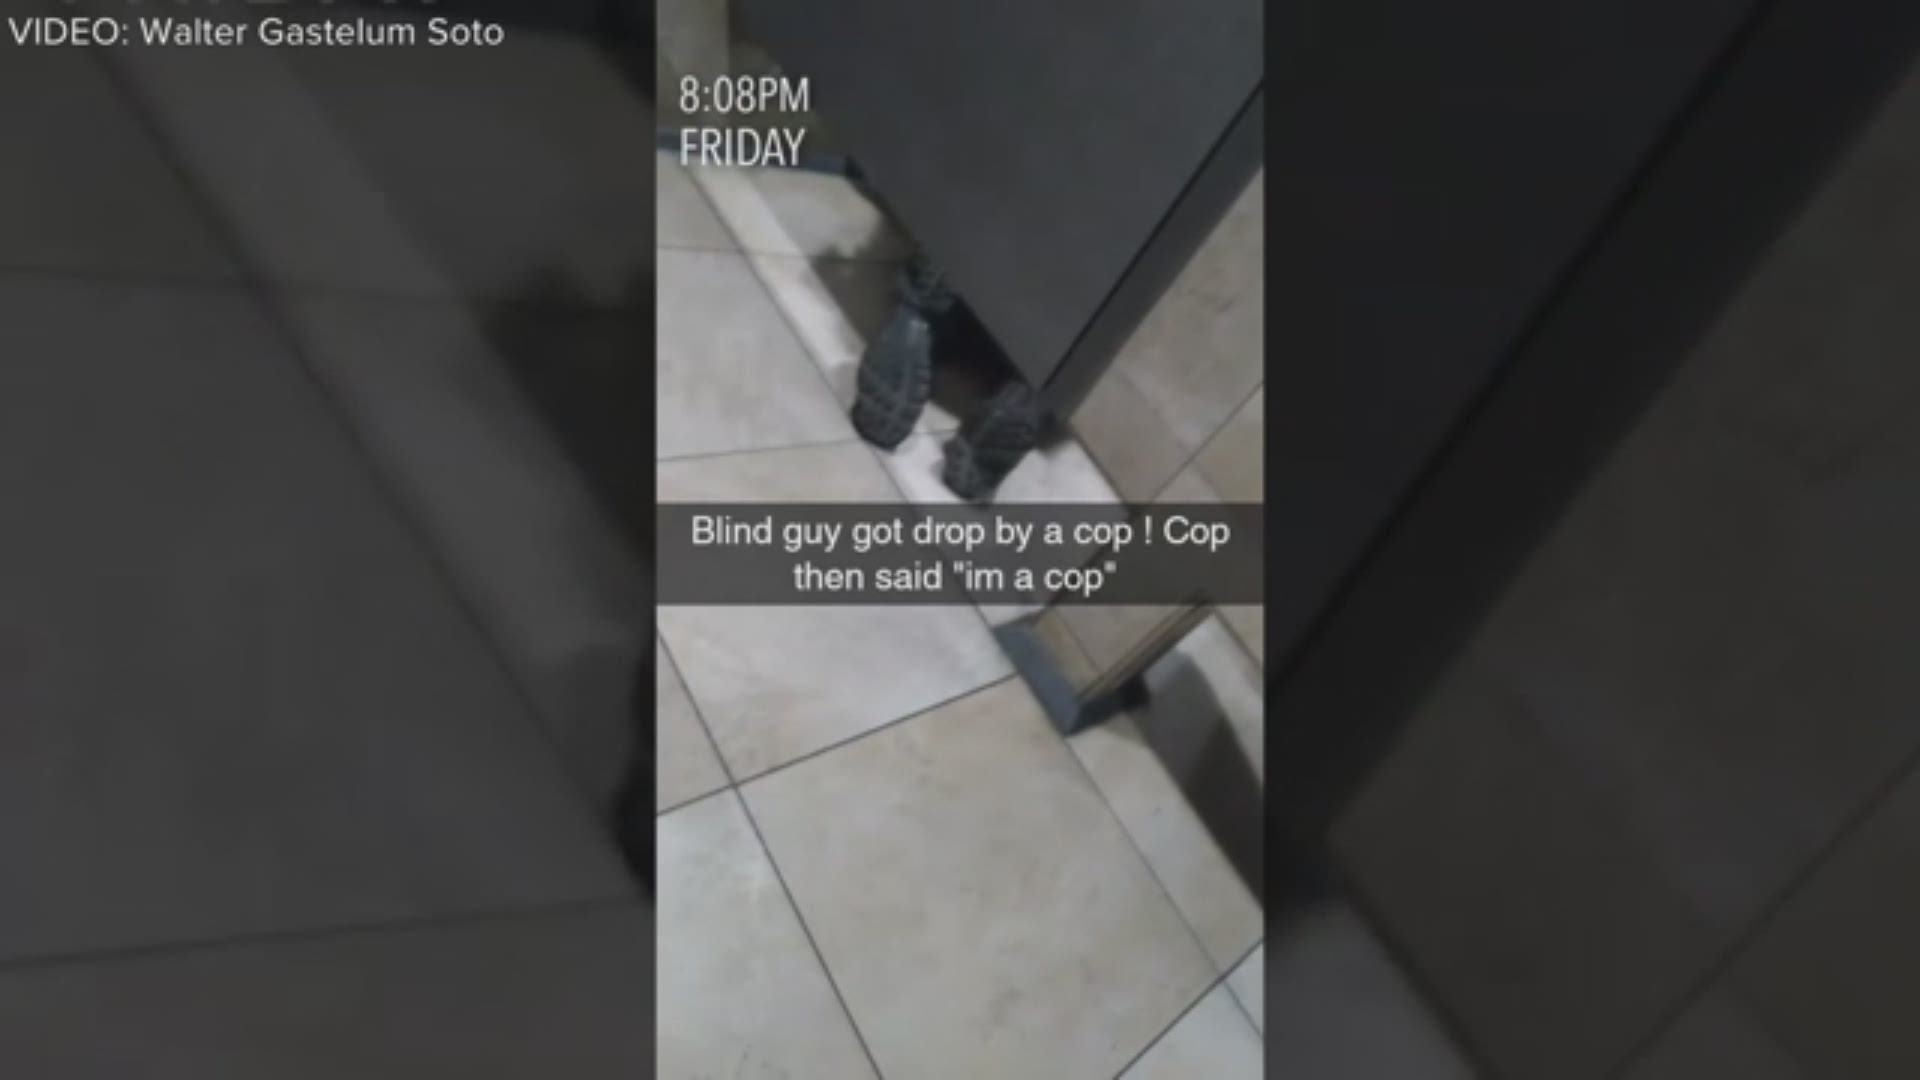 Marco Zepeda said he was snapping his fingers and feeling around for the urinal, when he was shoved by the officer without warning.